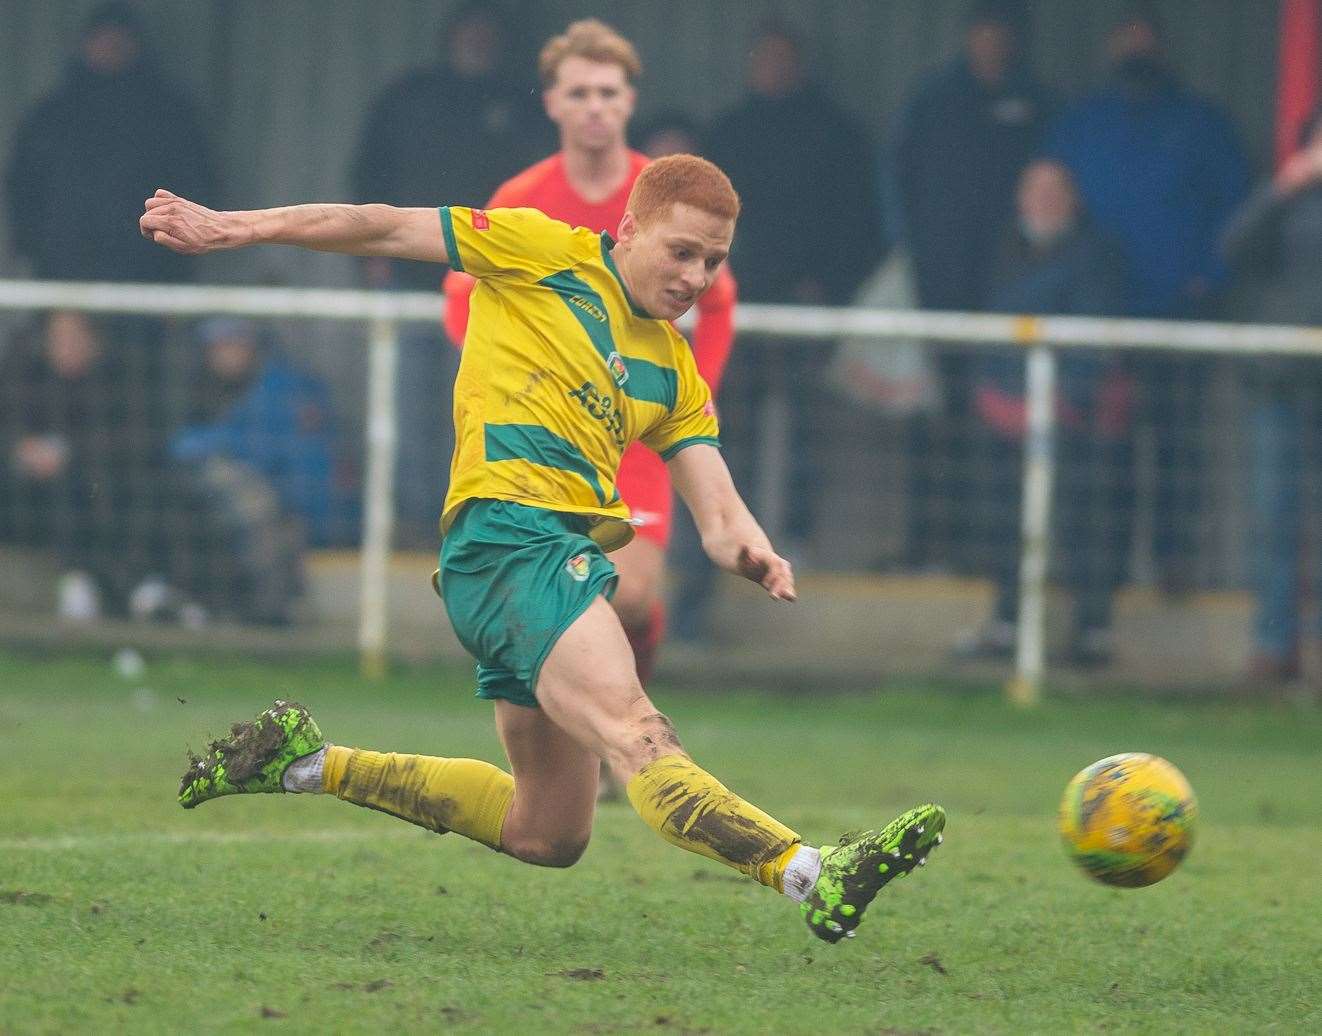 Tashi-Jay Kwayie on the stretch during Ashford's win at Hythe Picture: Ashford United